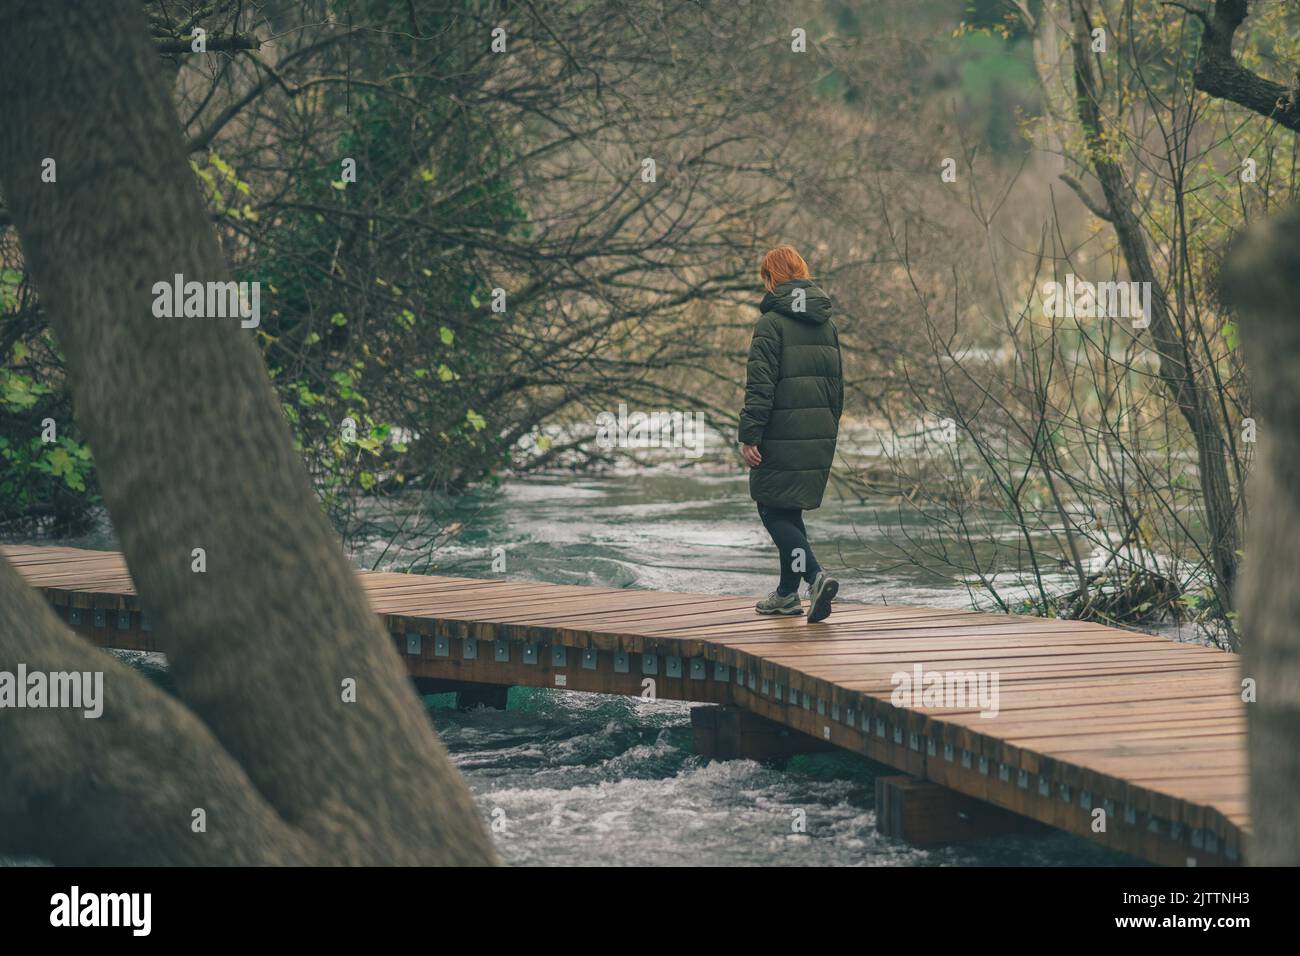 Unknown woman walking on the wooden path or walkway over some water rapids. Dangerous walking, suicidal tendencies. Stock Photo